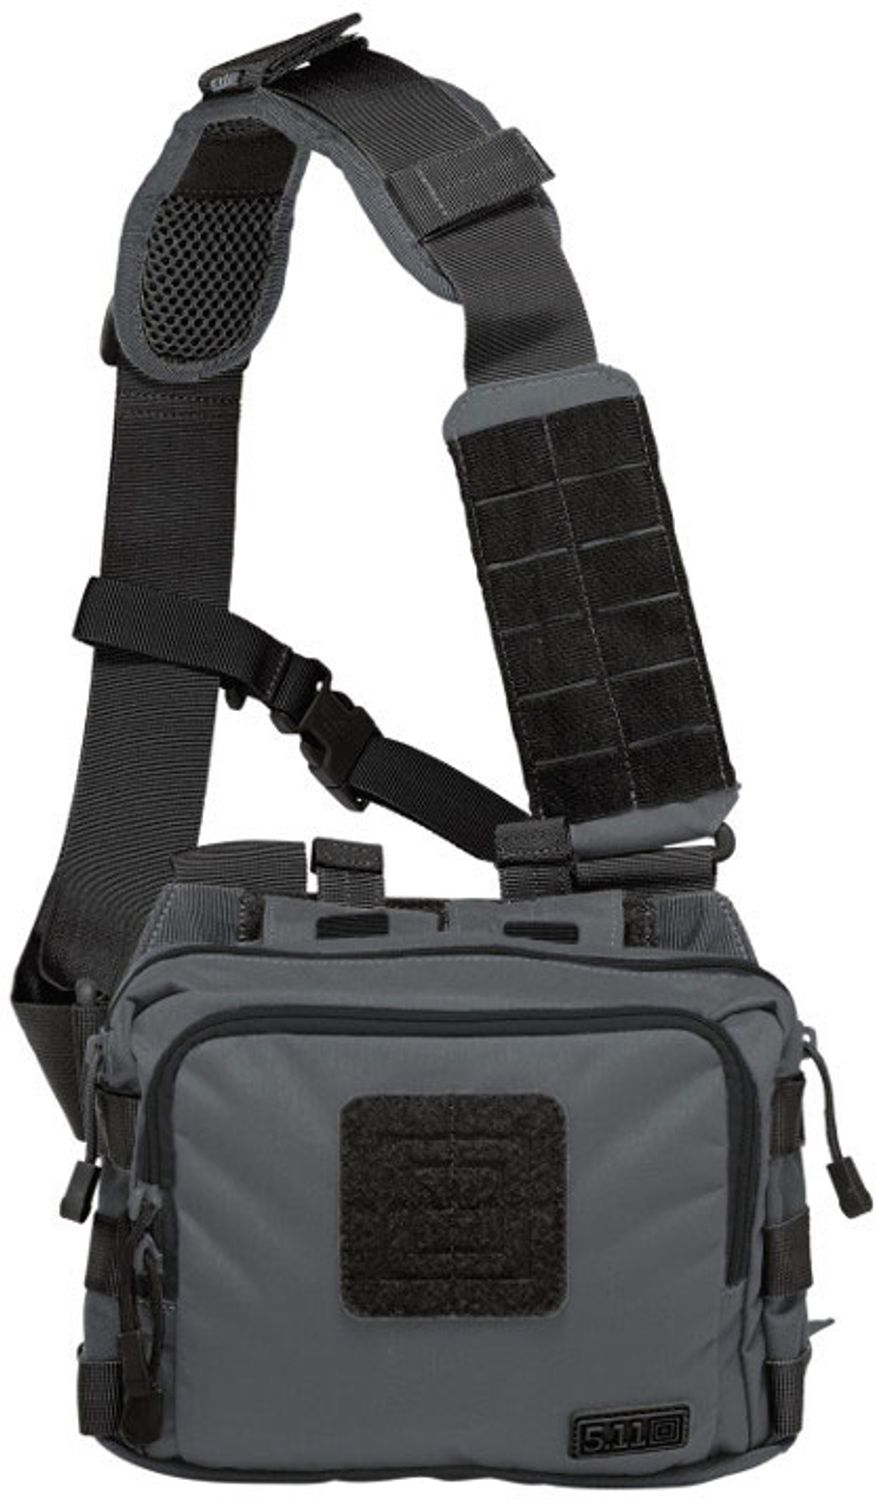 Tactical Bags and Backpacks, High-Quality Storage Options